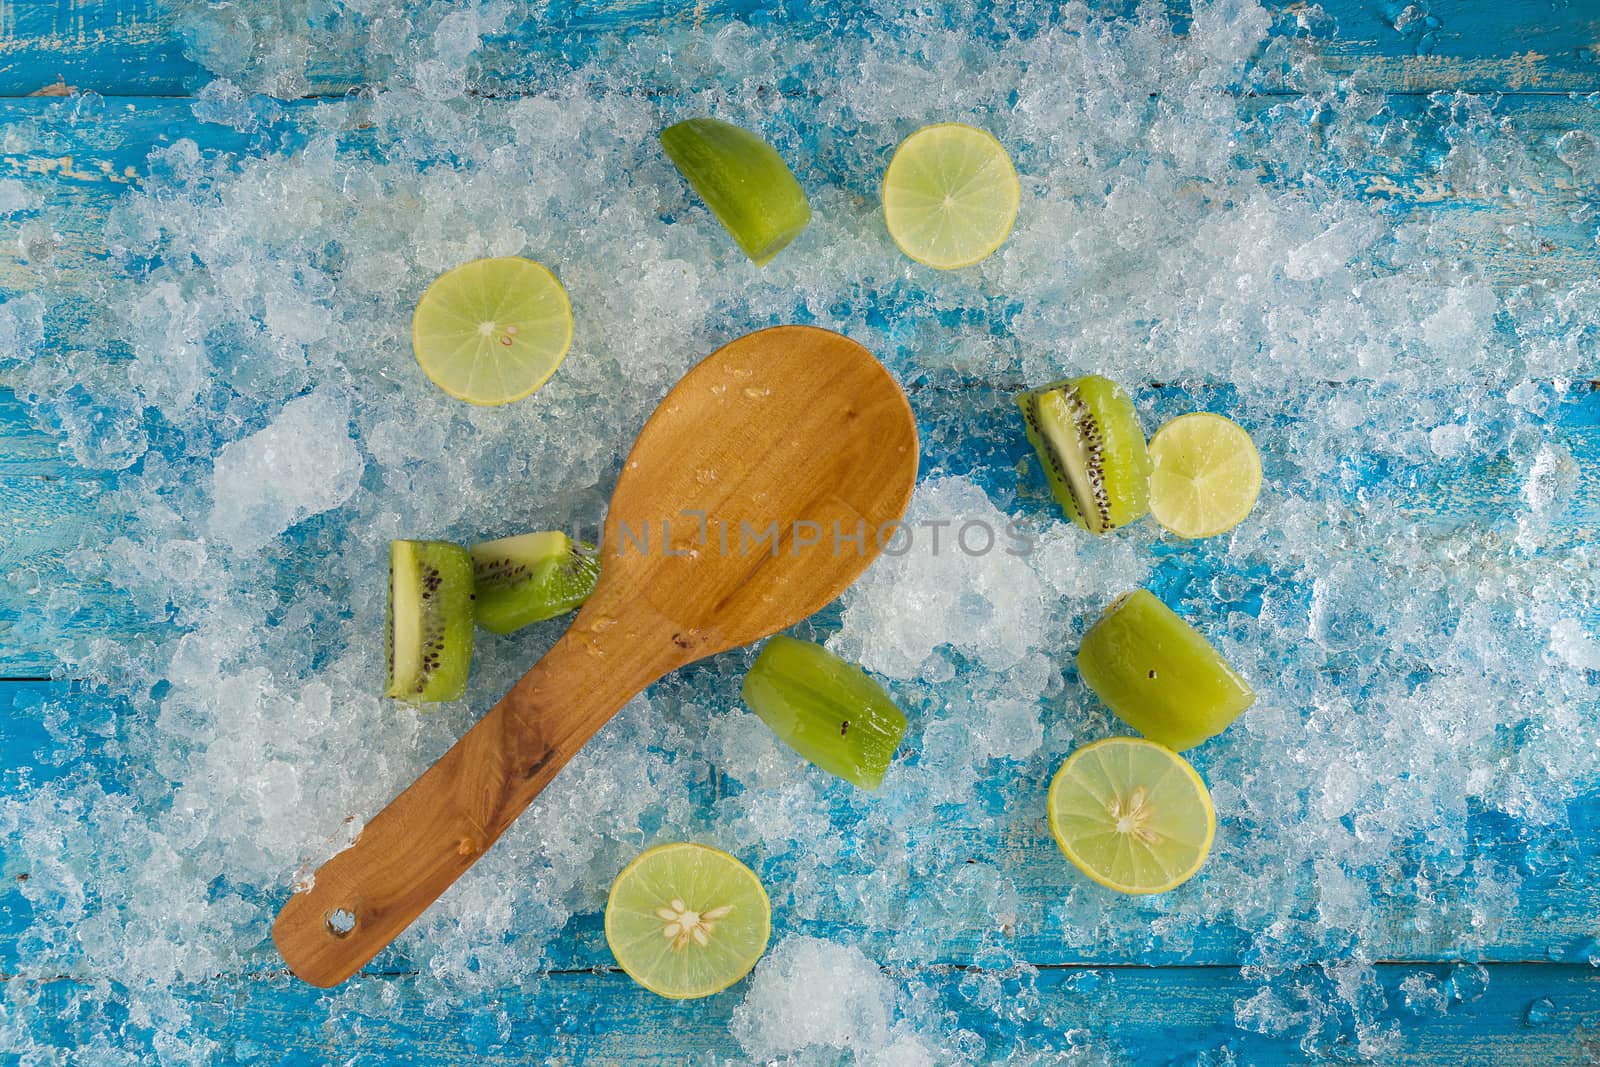 Crushed ice cubes and lemon, kiwi, wooden spoon on vintage blue  by kaiskynet